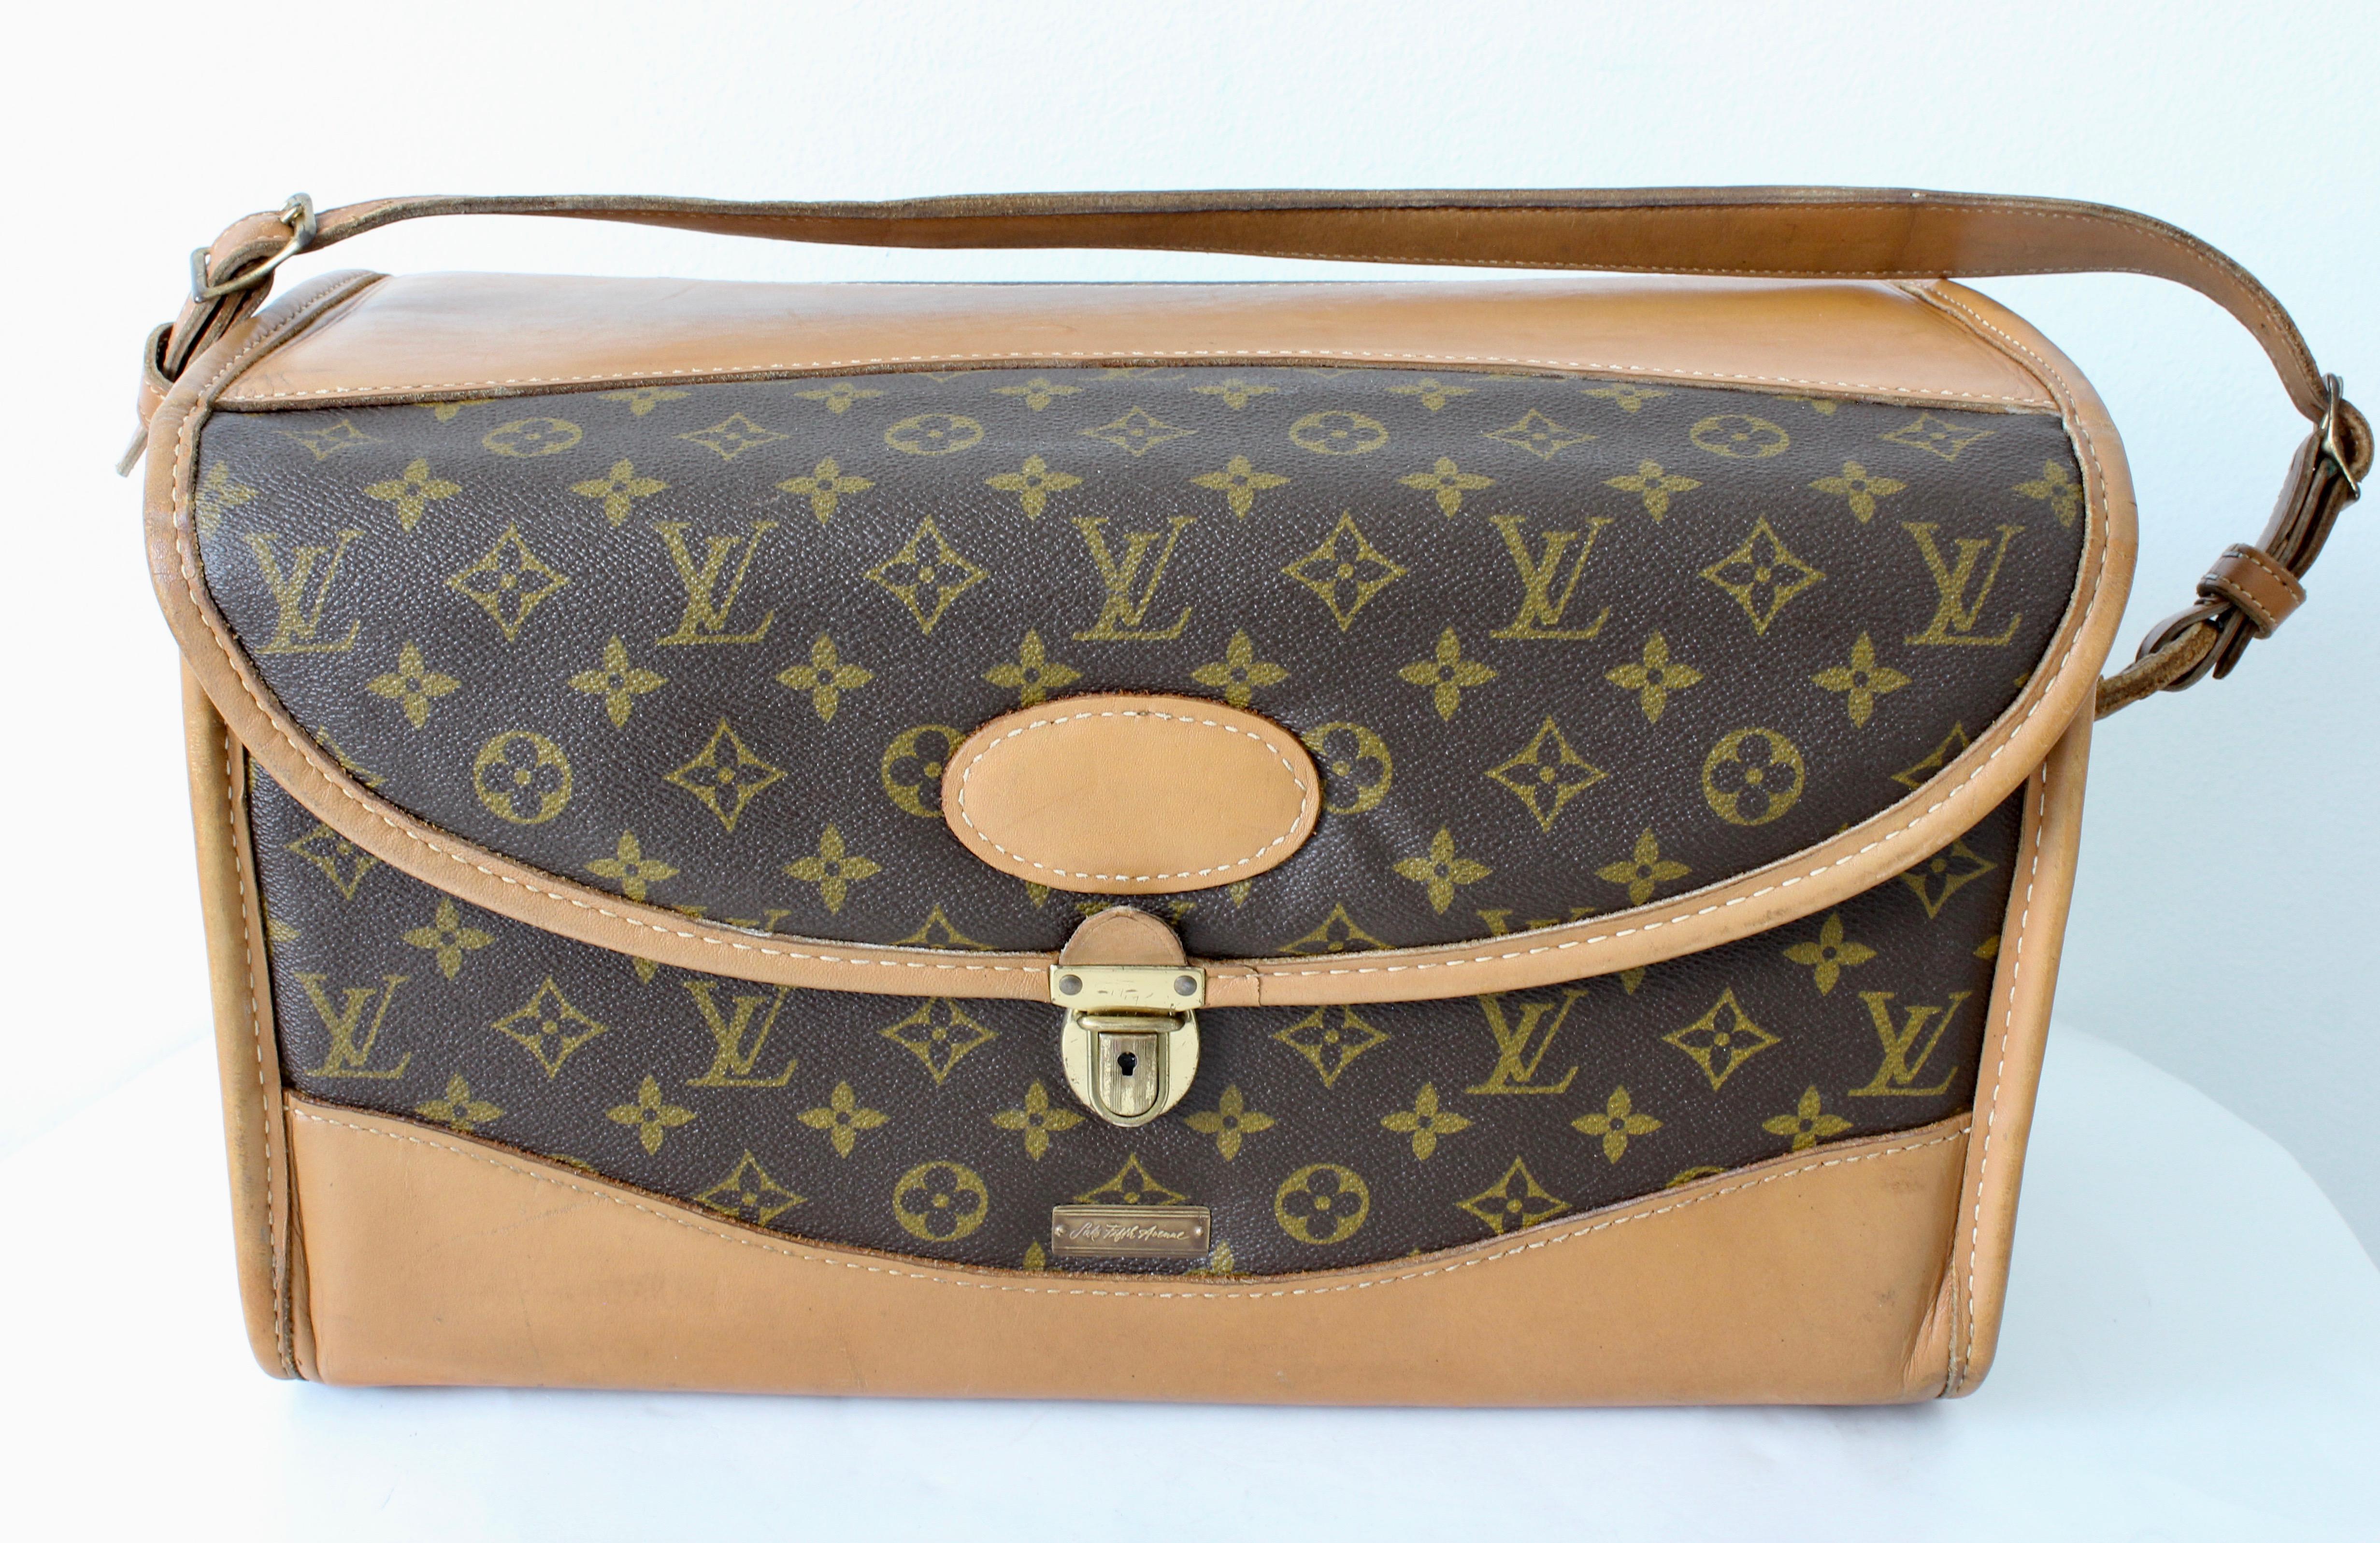 This fabulous train case or vanity was made by The French Company for Louis Vuitton and sold by Saks 5th Avenue, most likely in the mid 1970s.  Made from their signature monogram canvas, its trimmed in coated leather, features a leather patch for